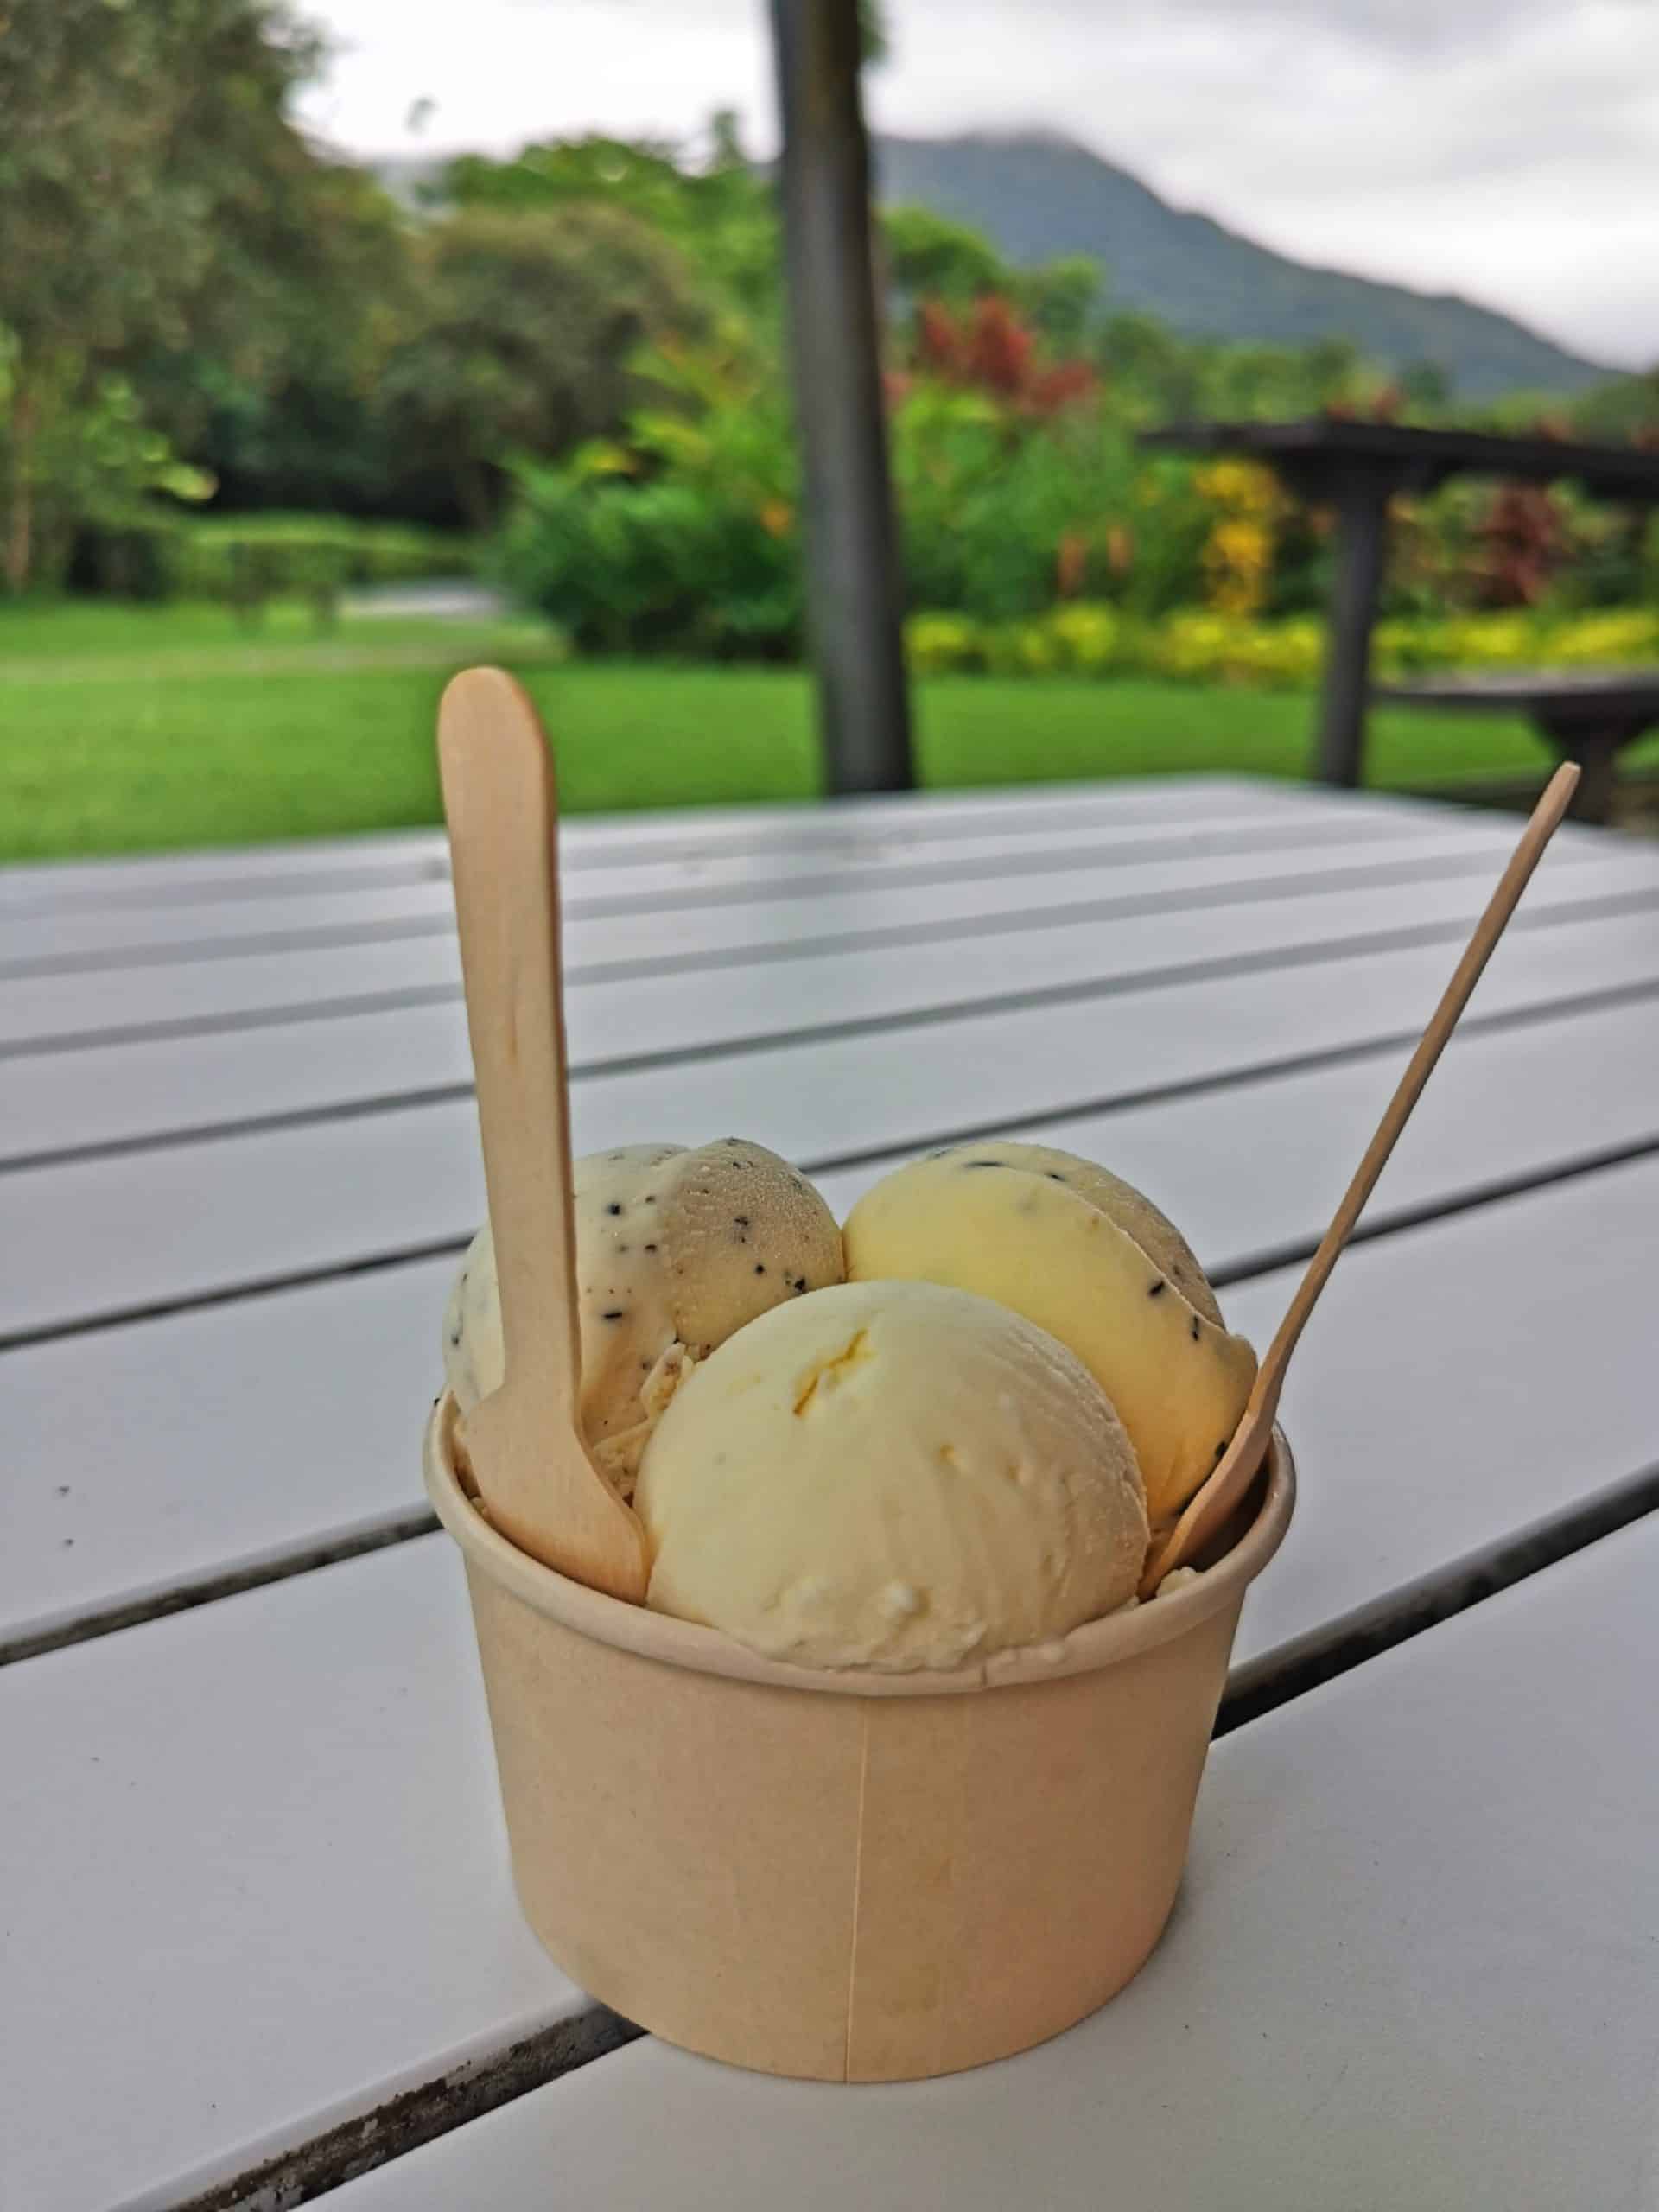 At the Daintree Ice Cream Company in Far North Queensland // Travel Mermaid